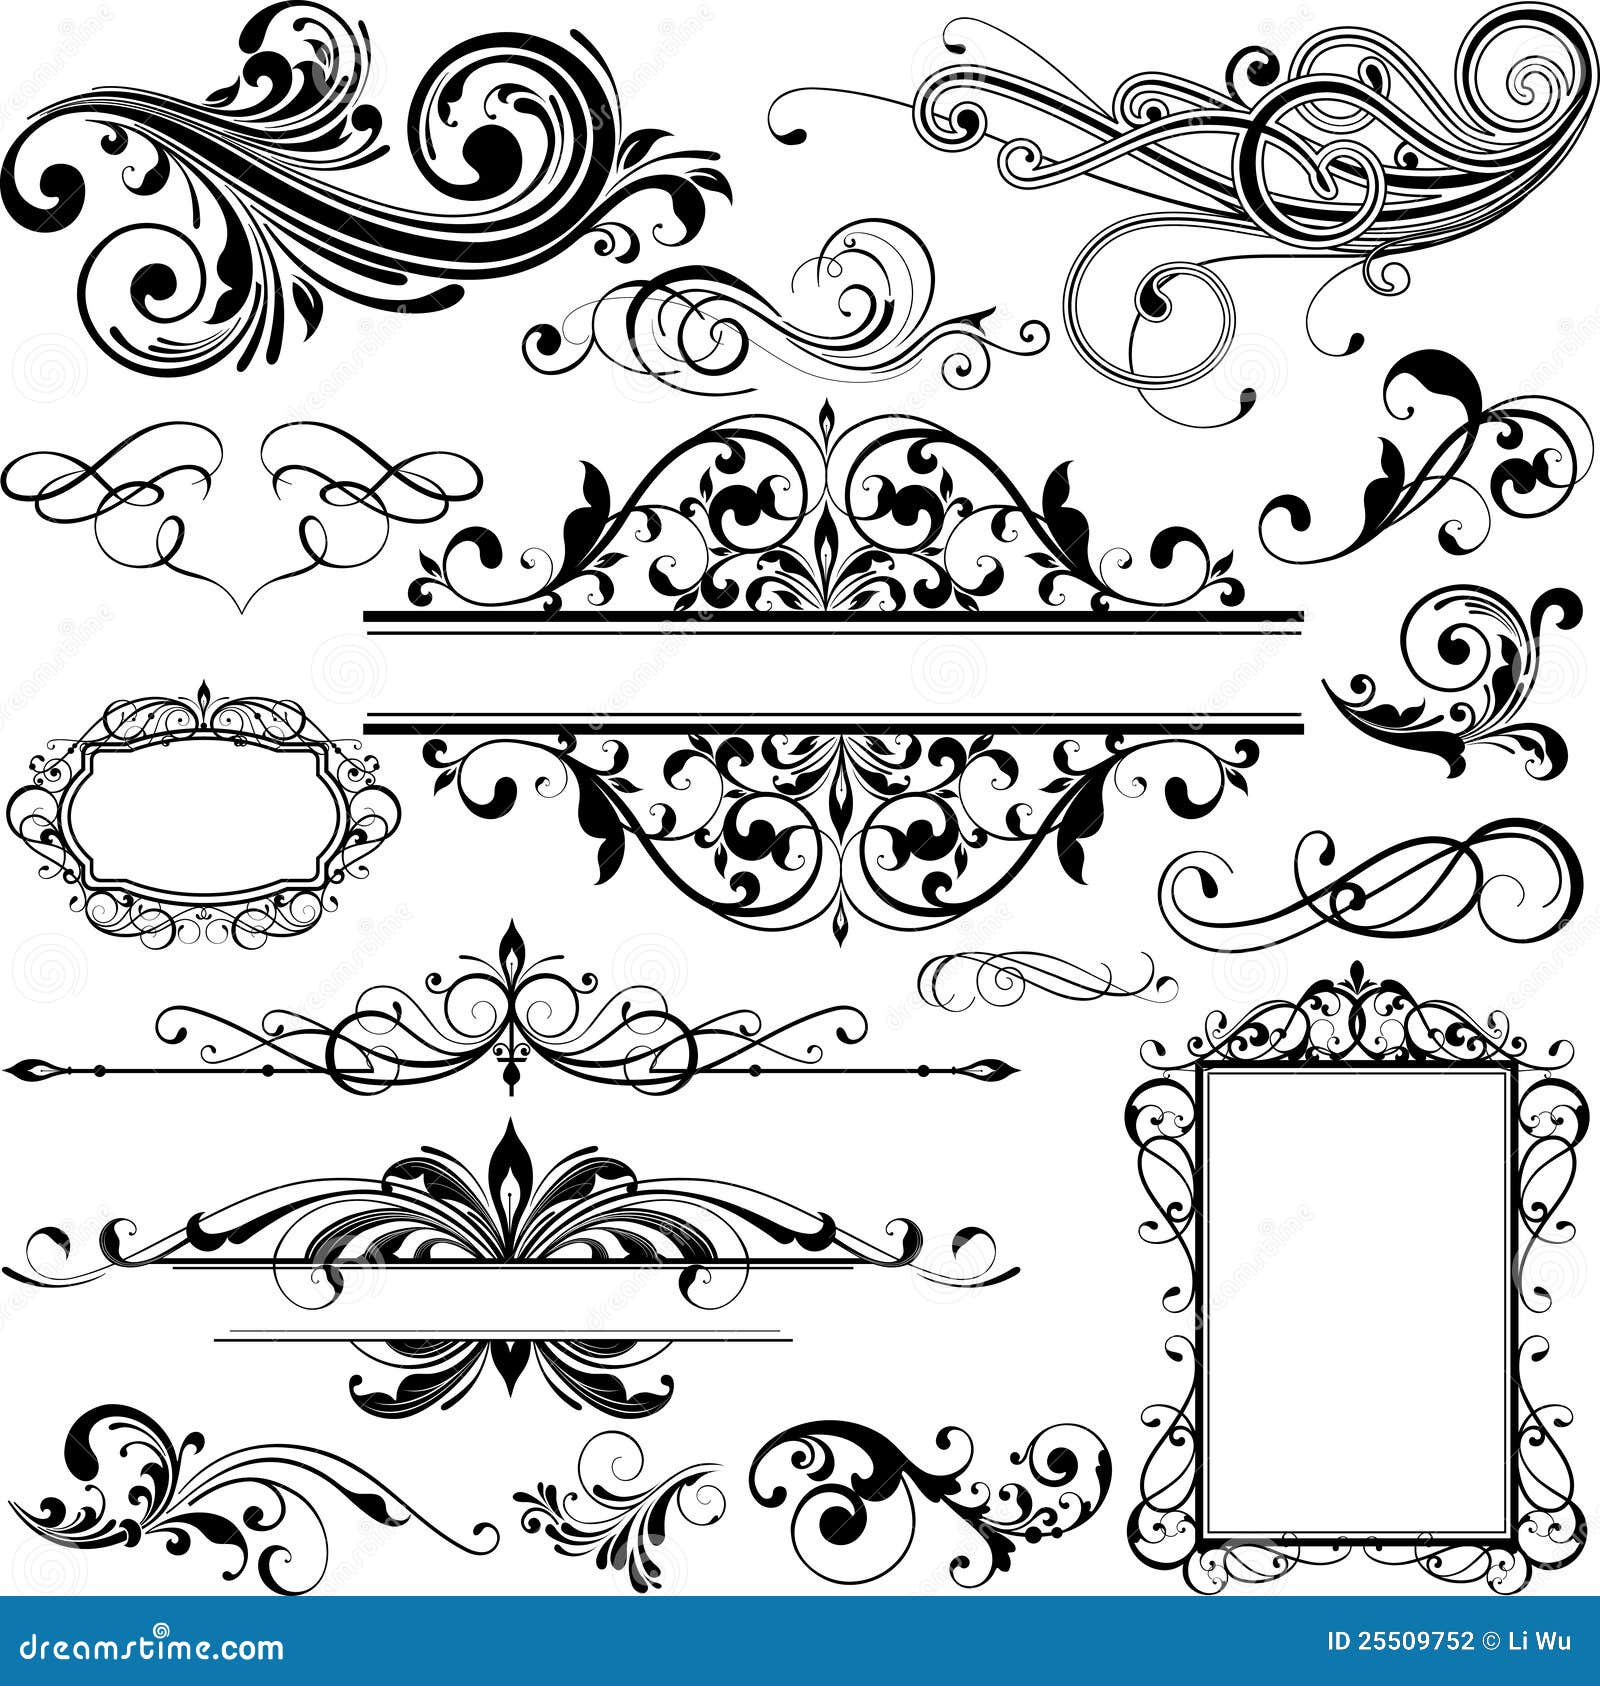 Floral graphic design elements Royalty Free Vector Image